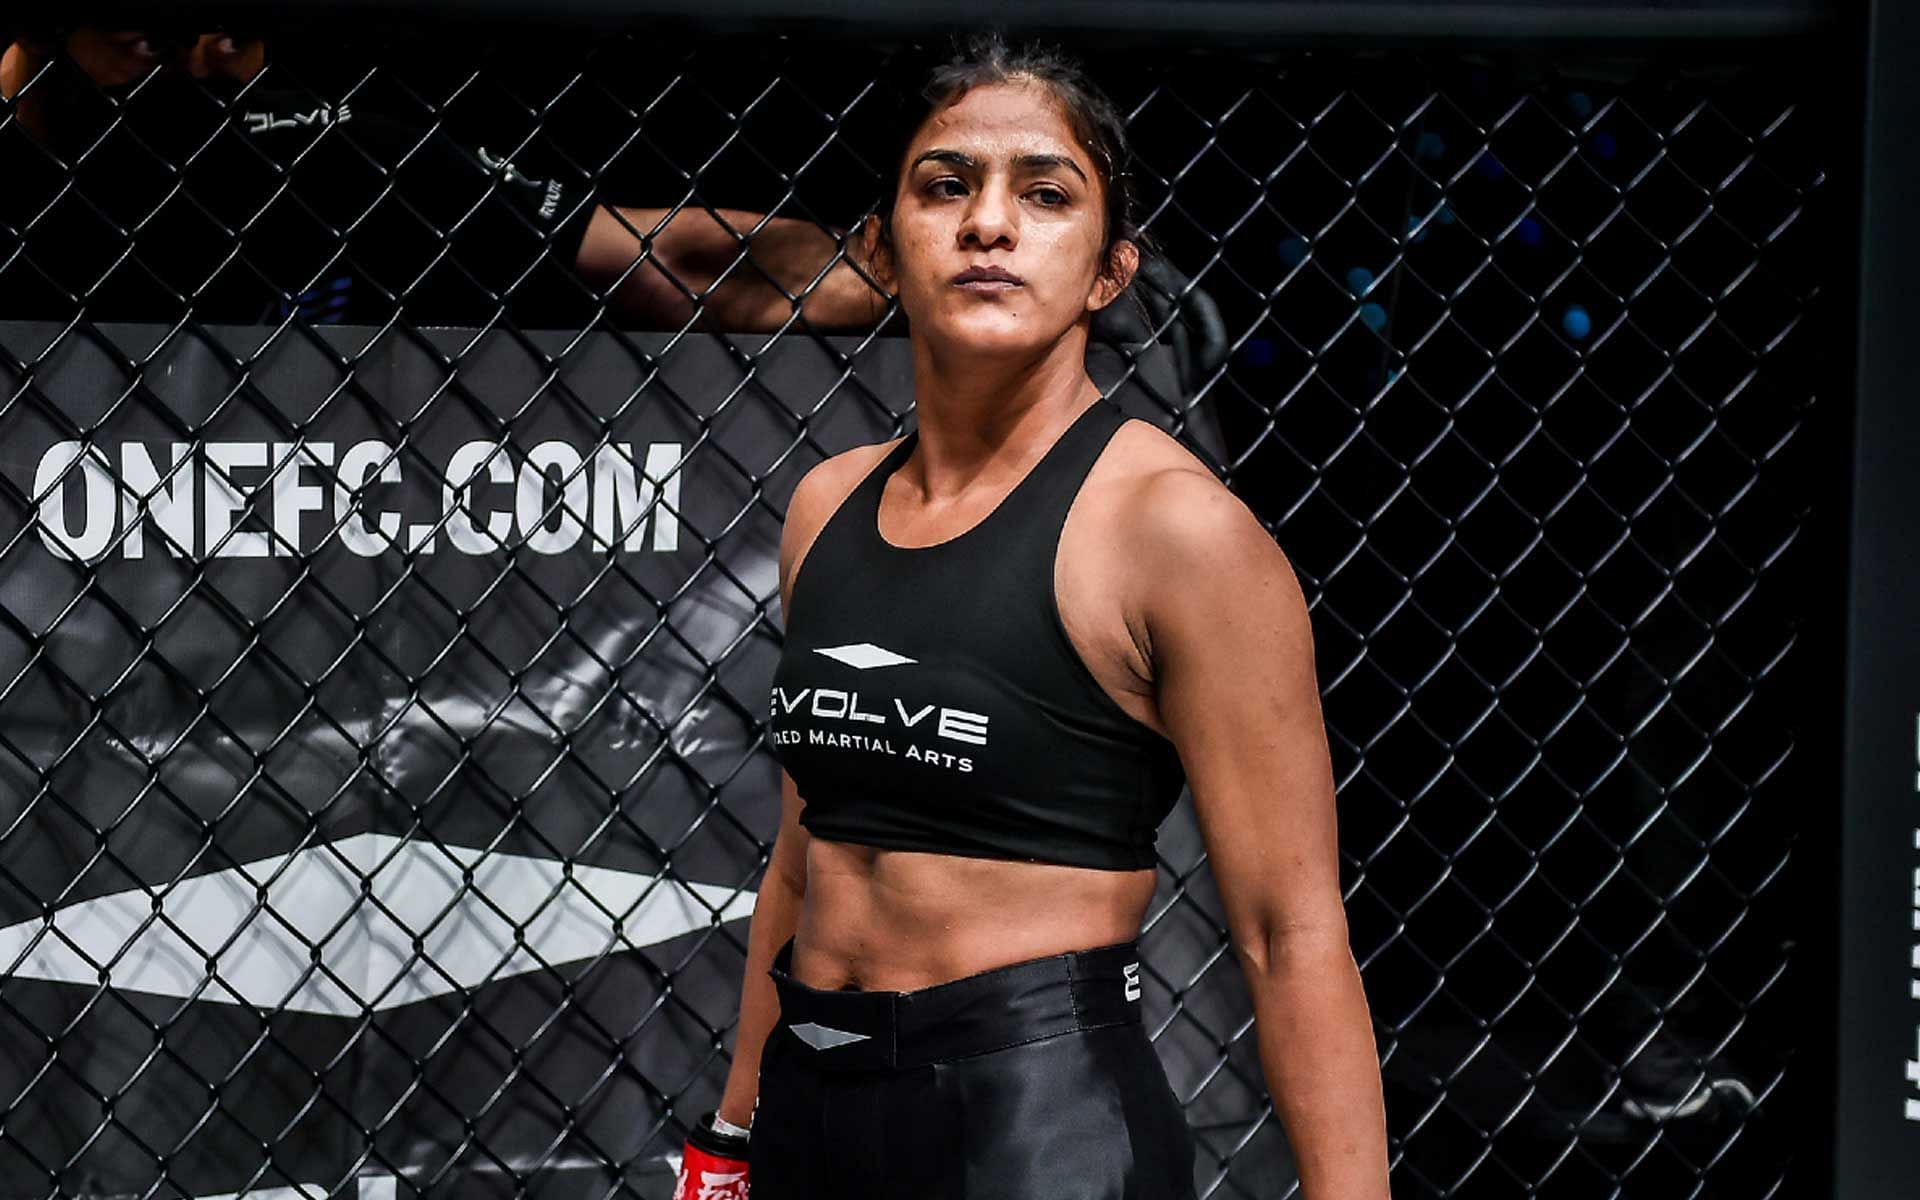 Ritu &#039;The Indian Tigress&#039; Phogat stares down her opponent in the Circle [Photo courtesy of ONE Championship]